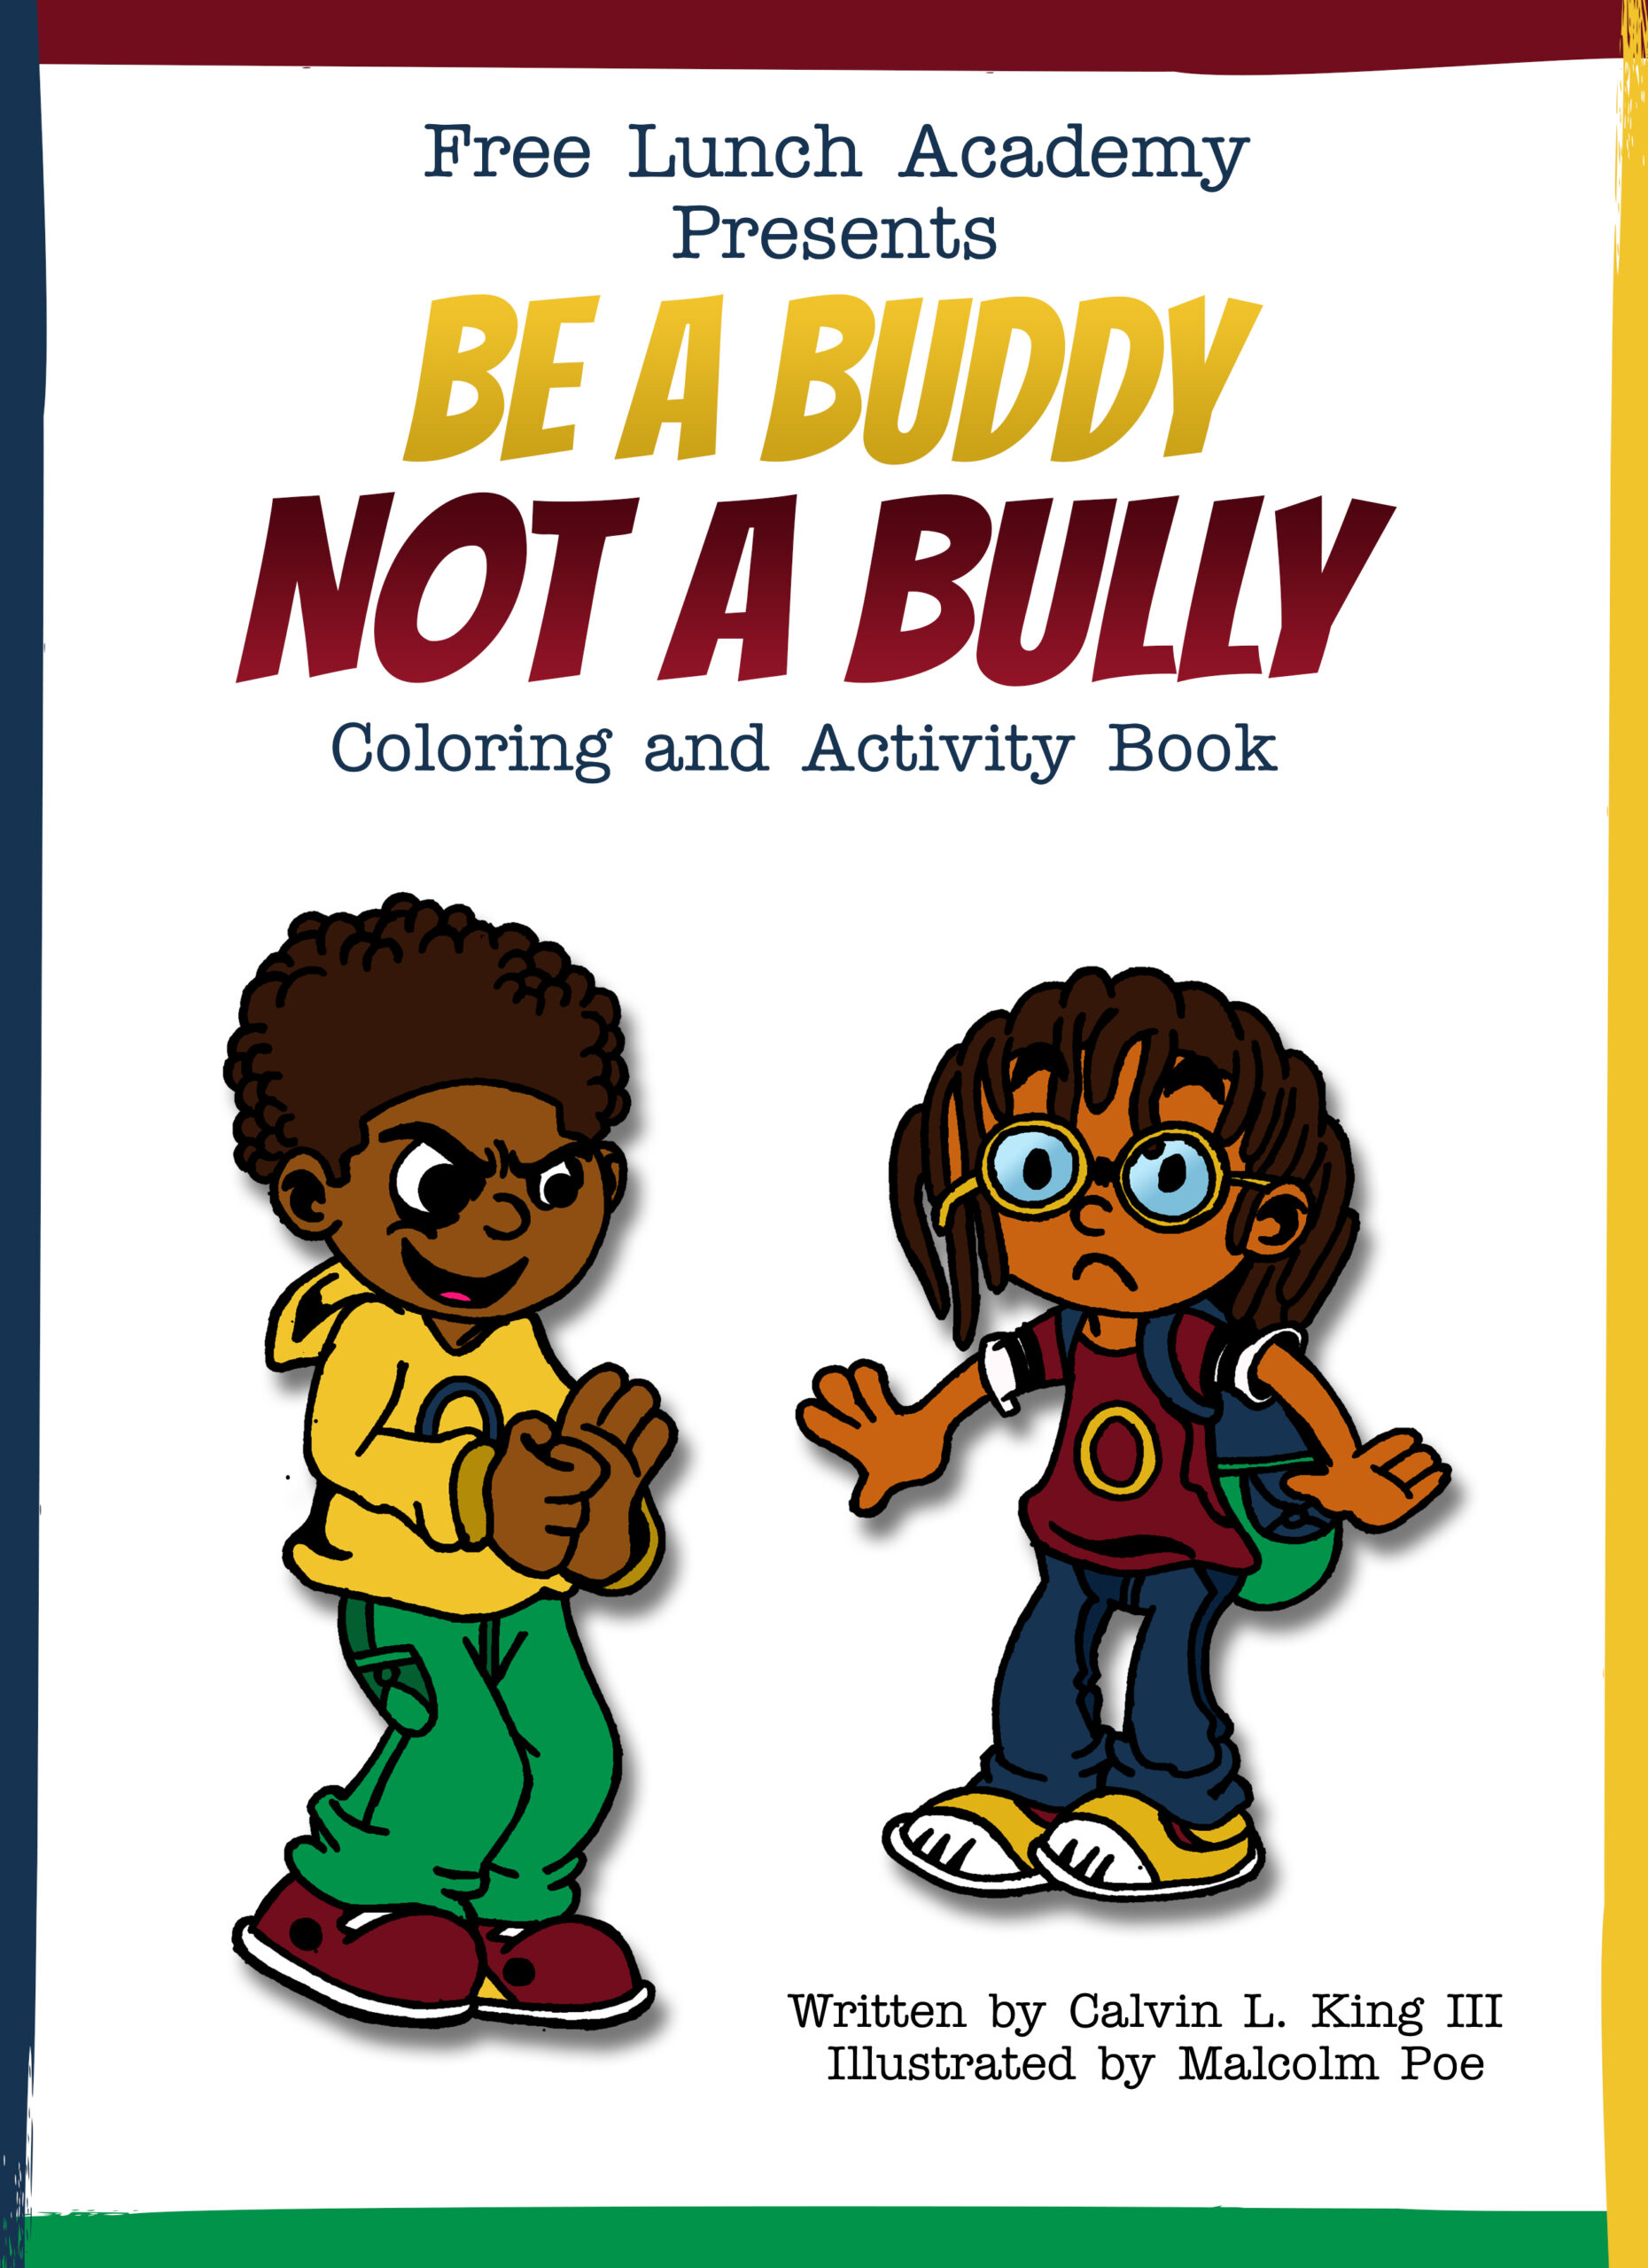 Be A Buddy Not A Bully (Coloring & Activity Book)